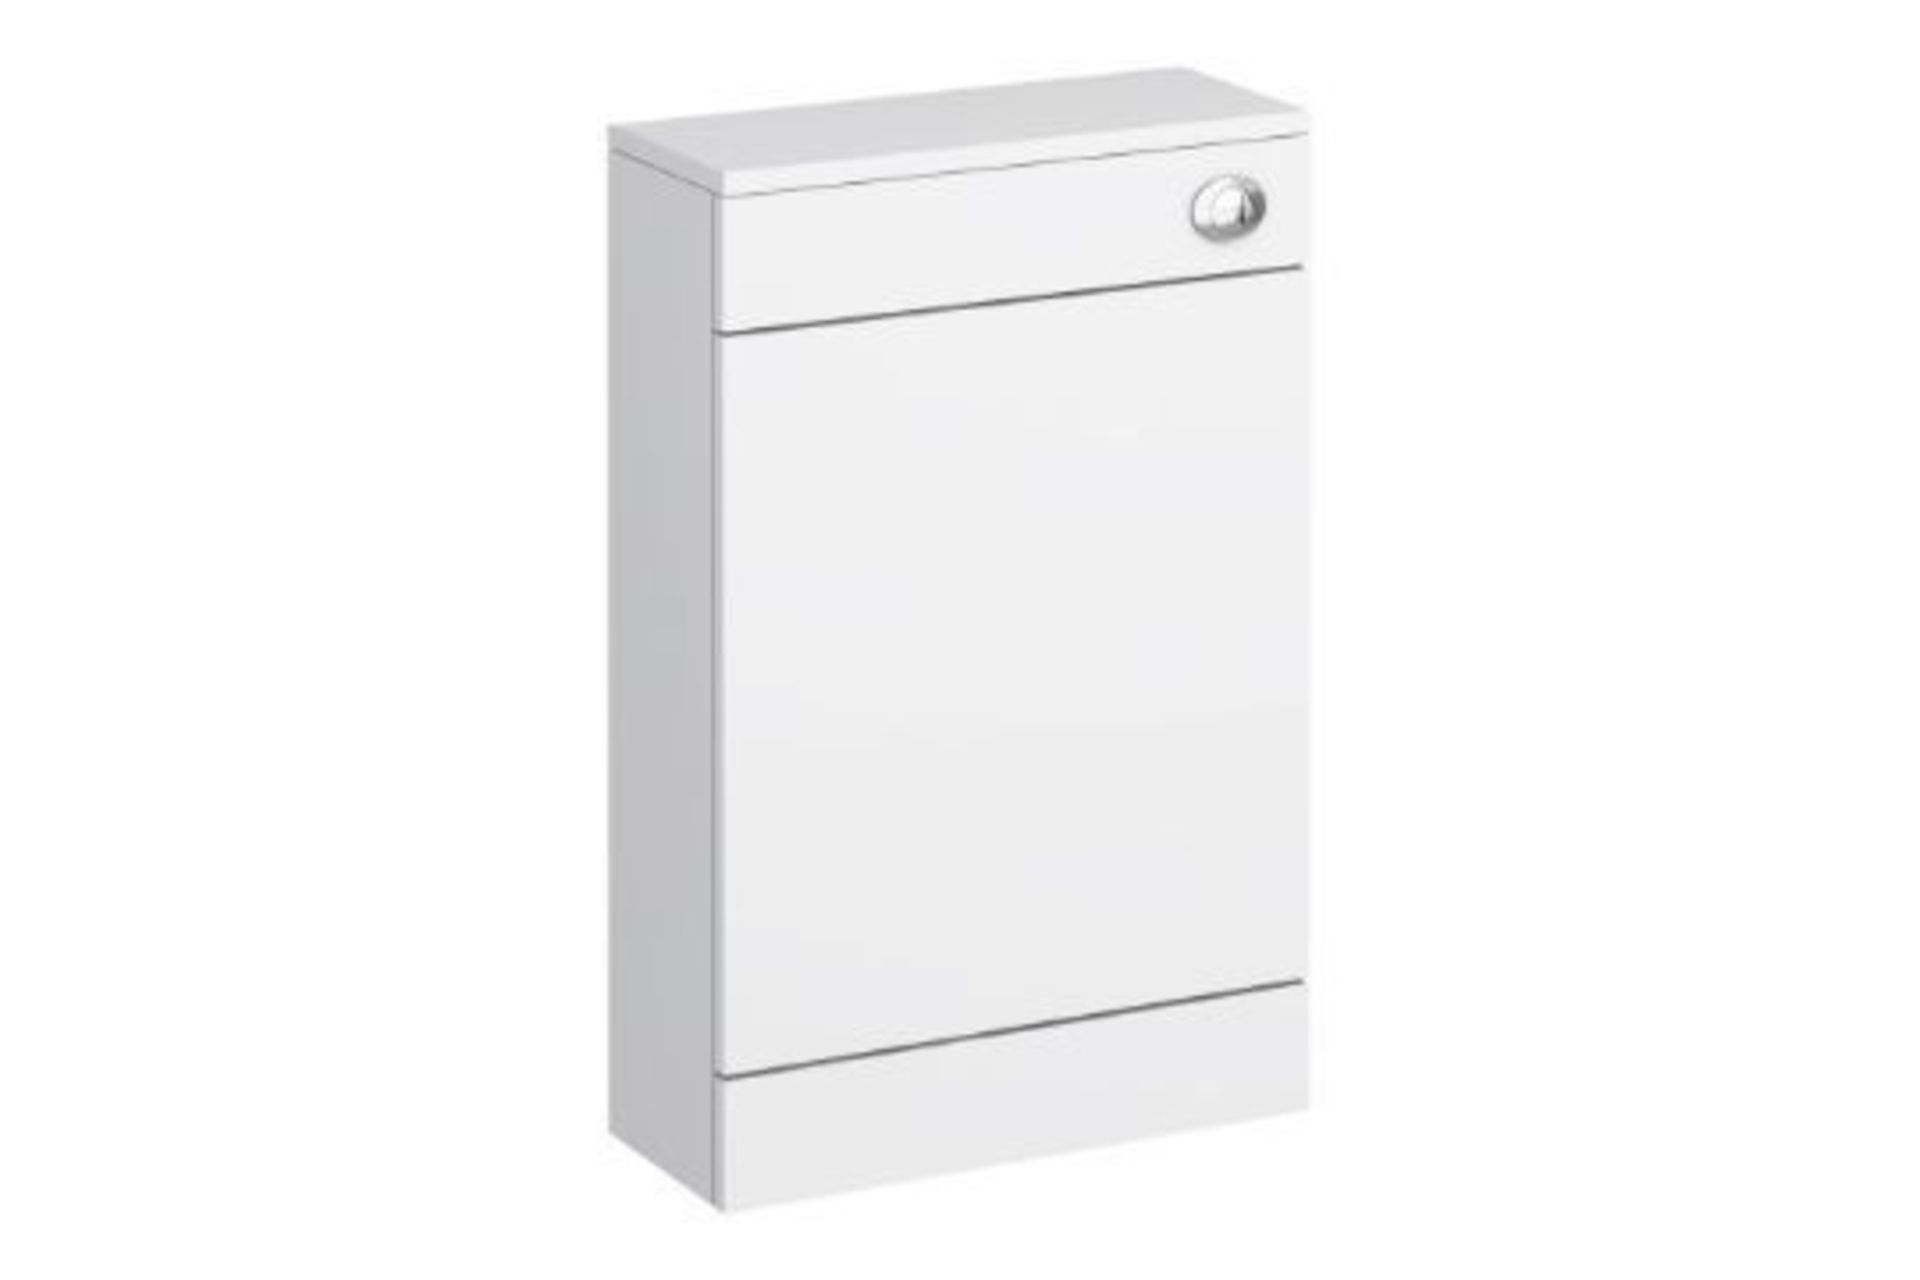 NEW BOXED Sienna High Gloss White WC Unit with Concealed Cistern W500 x D200mm - NVS142. RRP £199.99